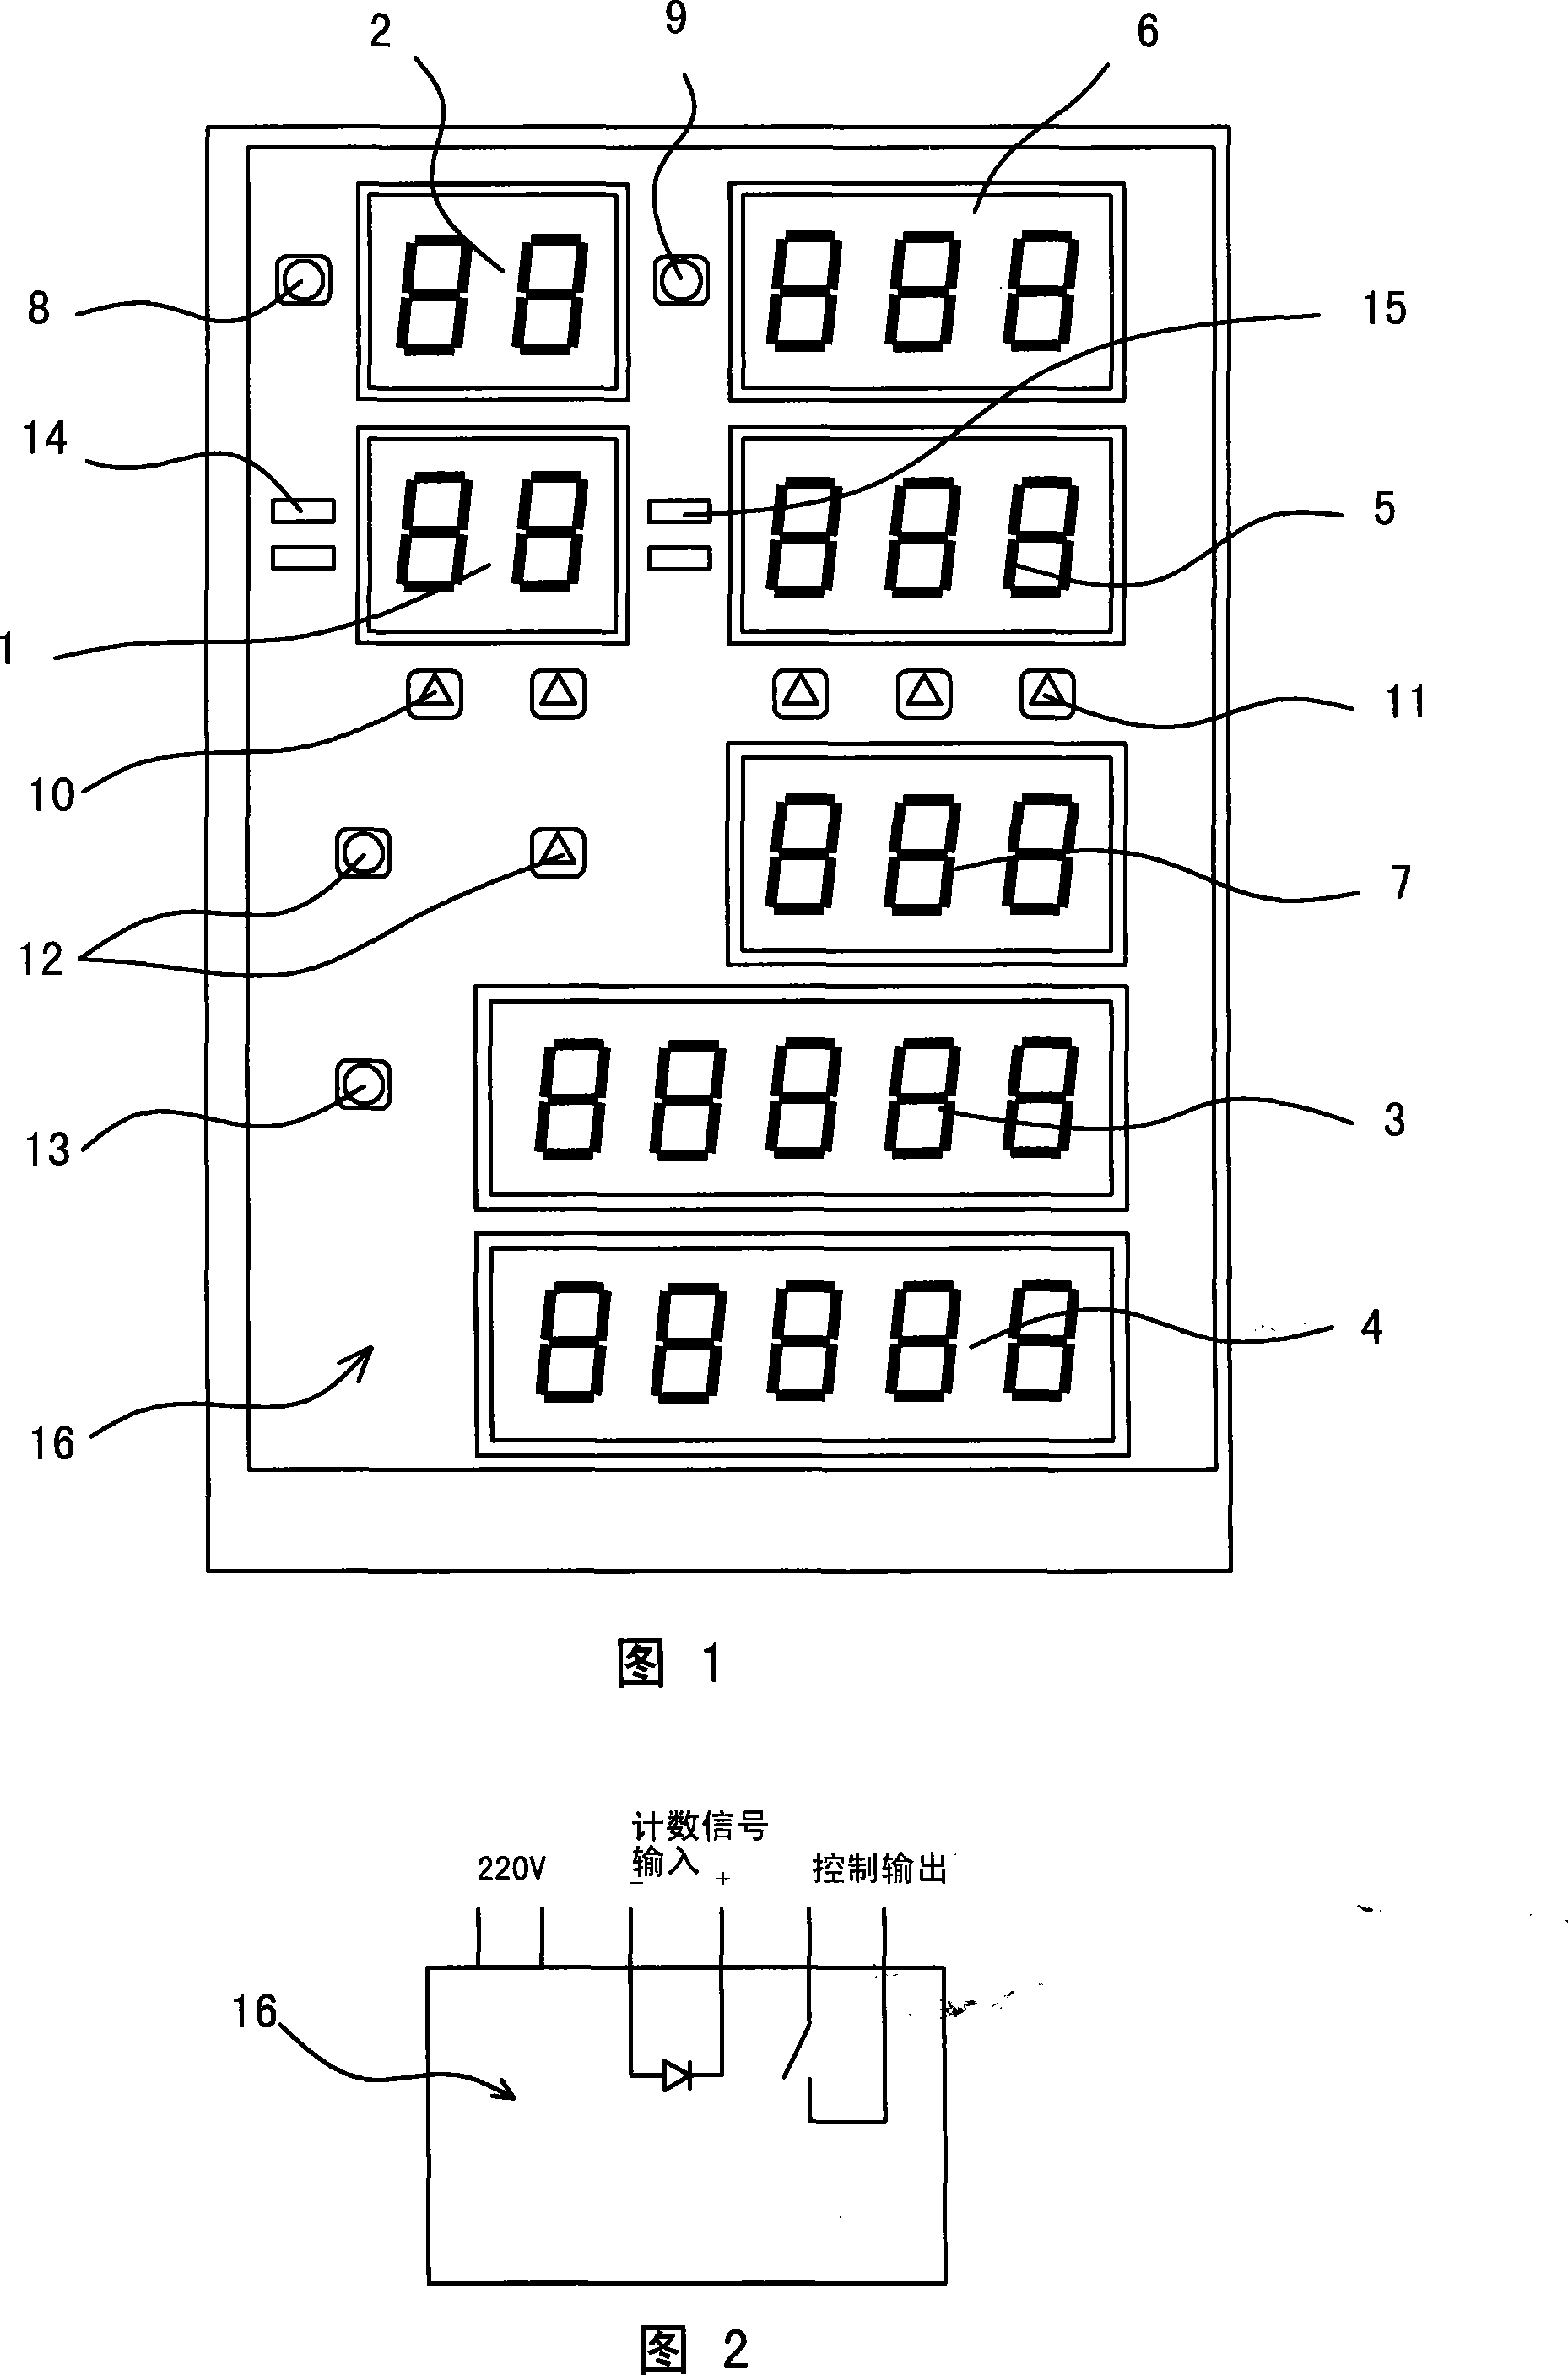 Multi-point repeat process step monitoring counter